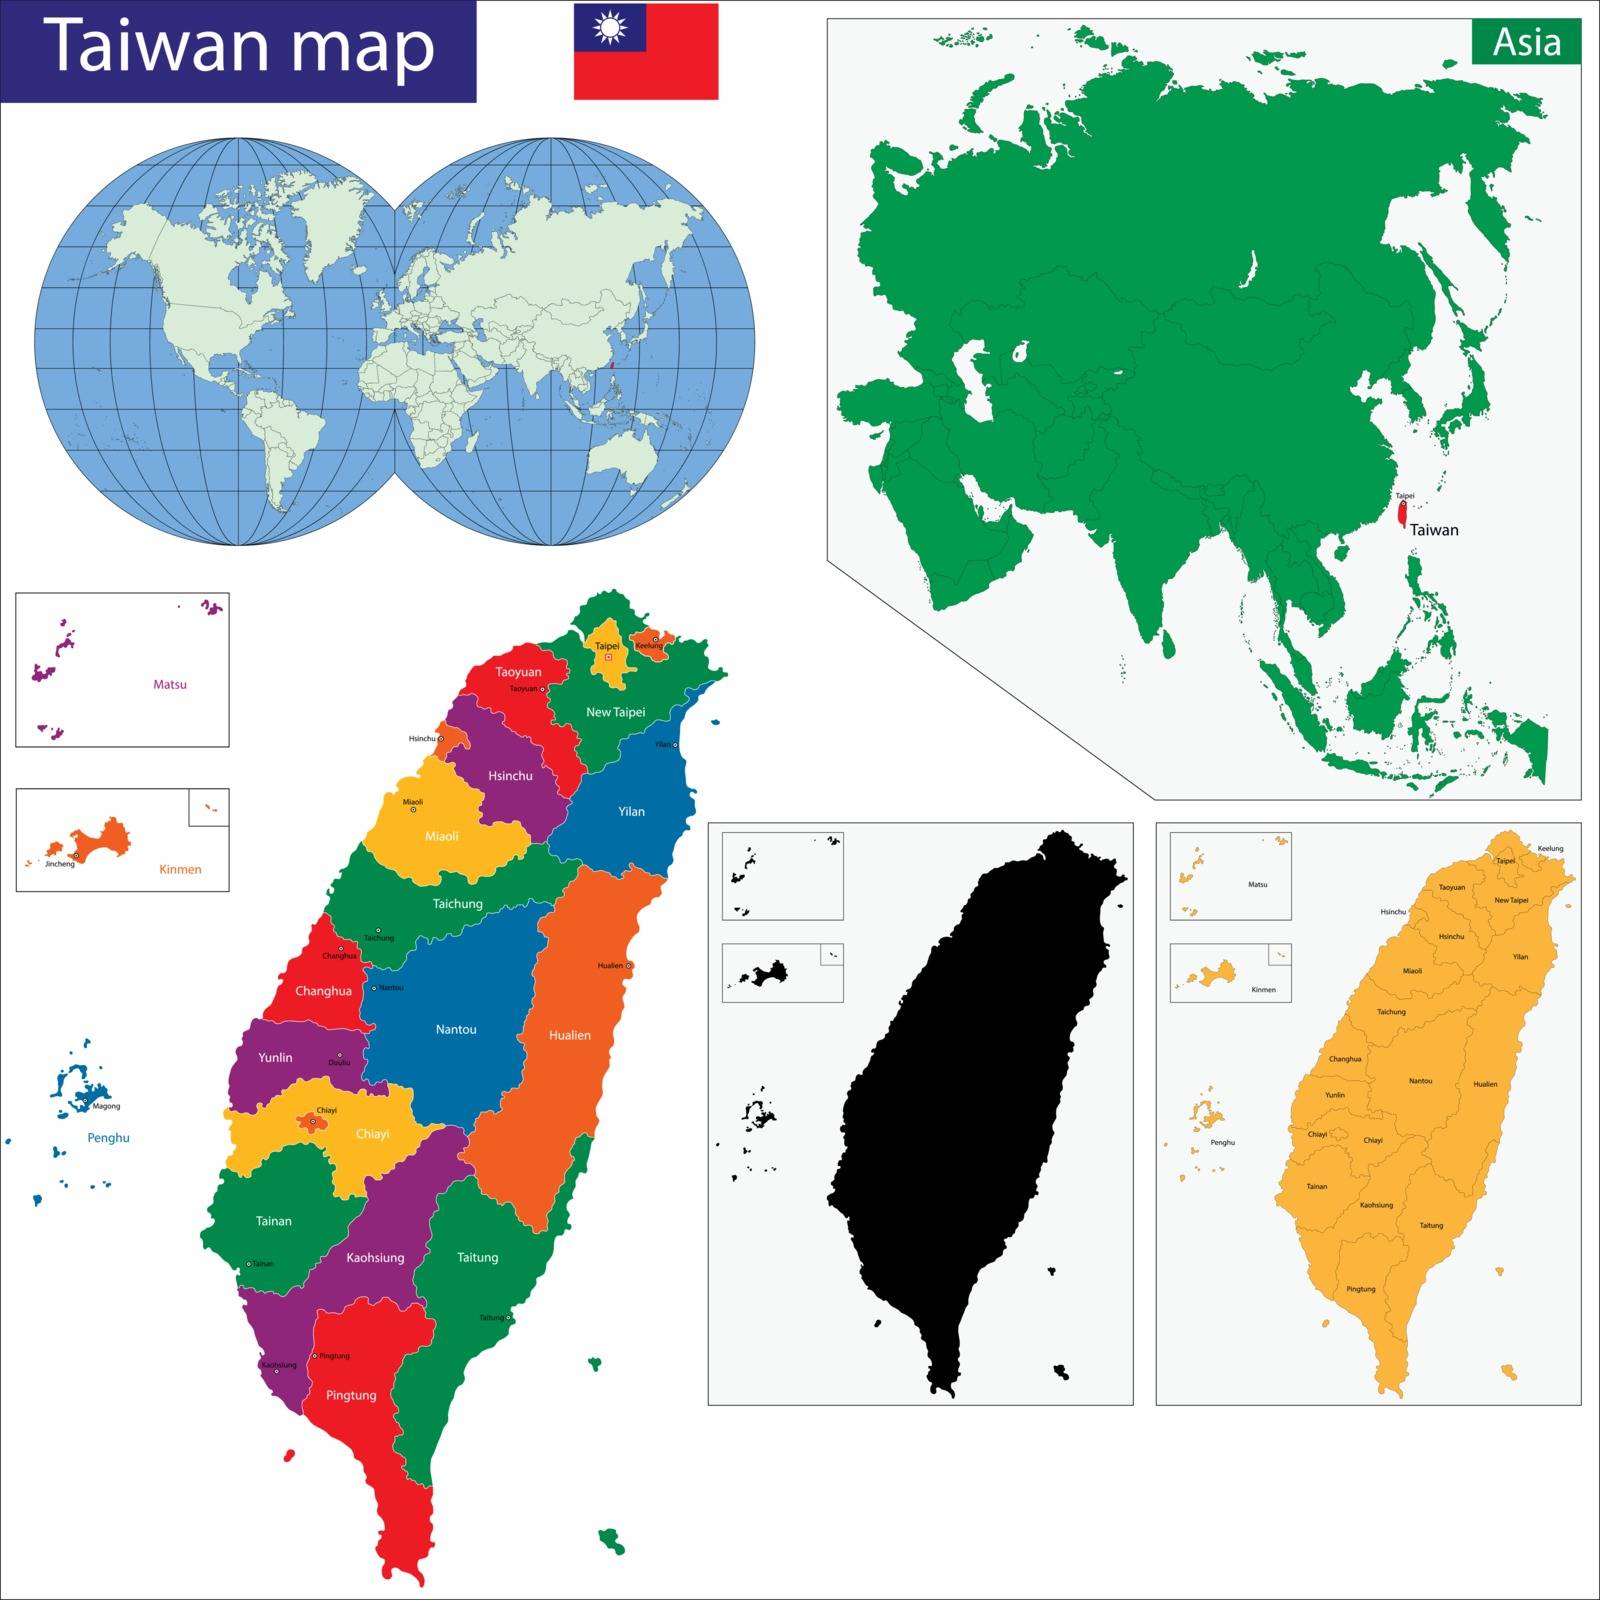 Vector map of Taiwan drawn with high detail and accuracy. Taiwan is divided into regions which are colored with different bright colors.